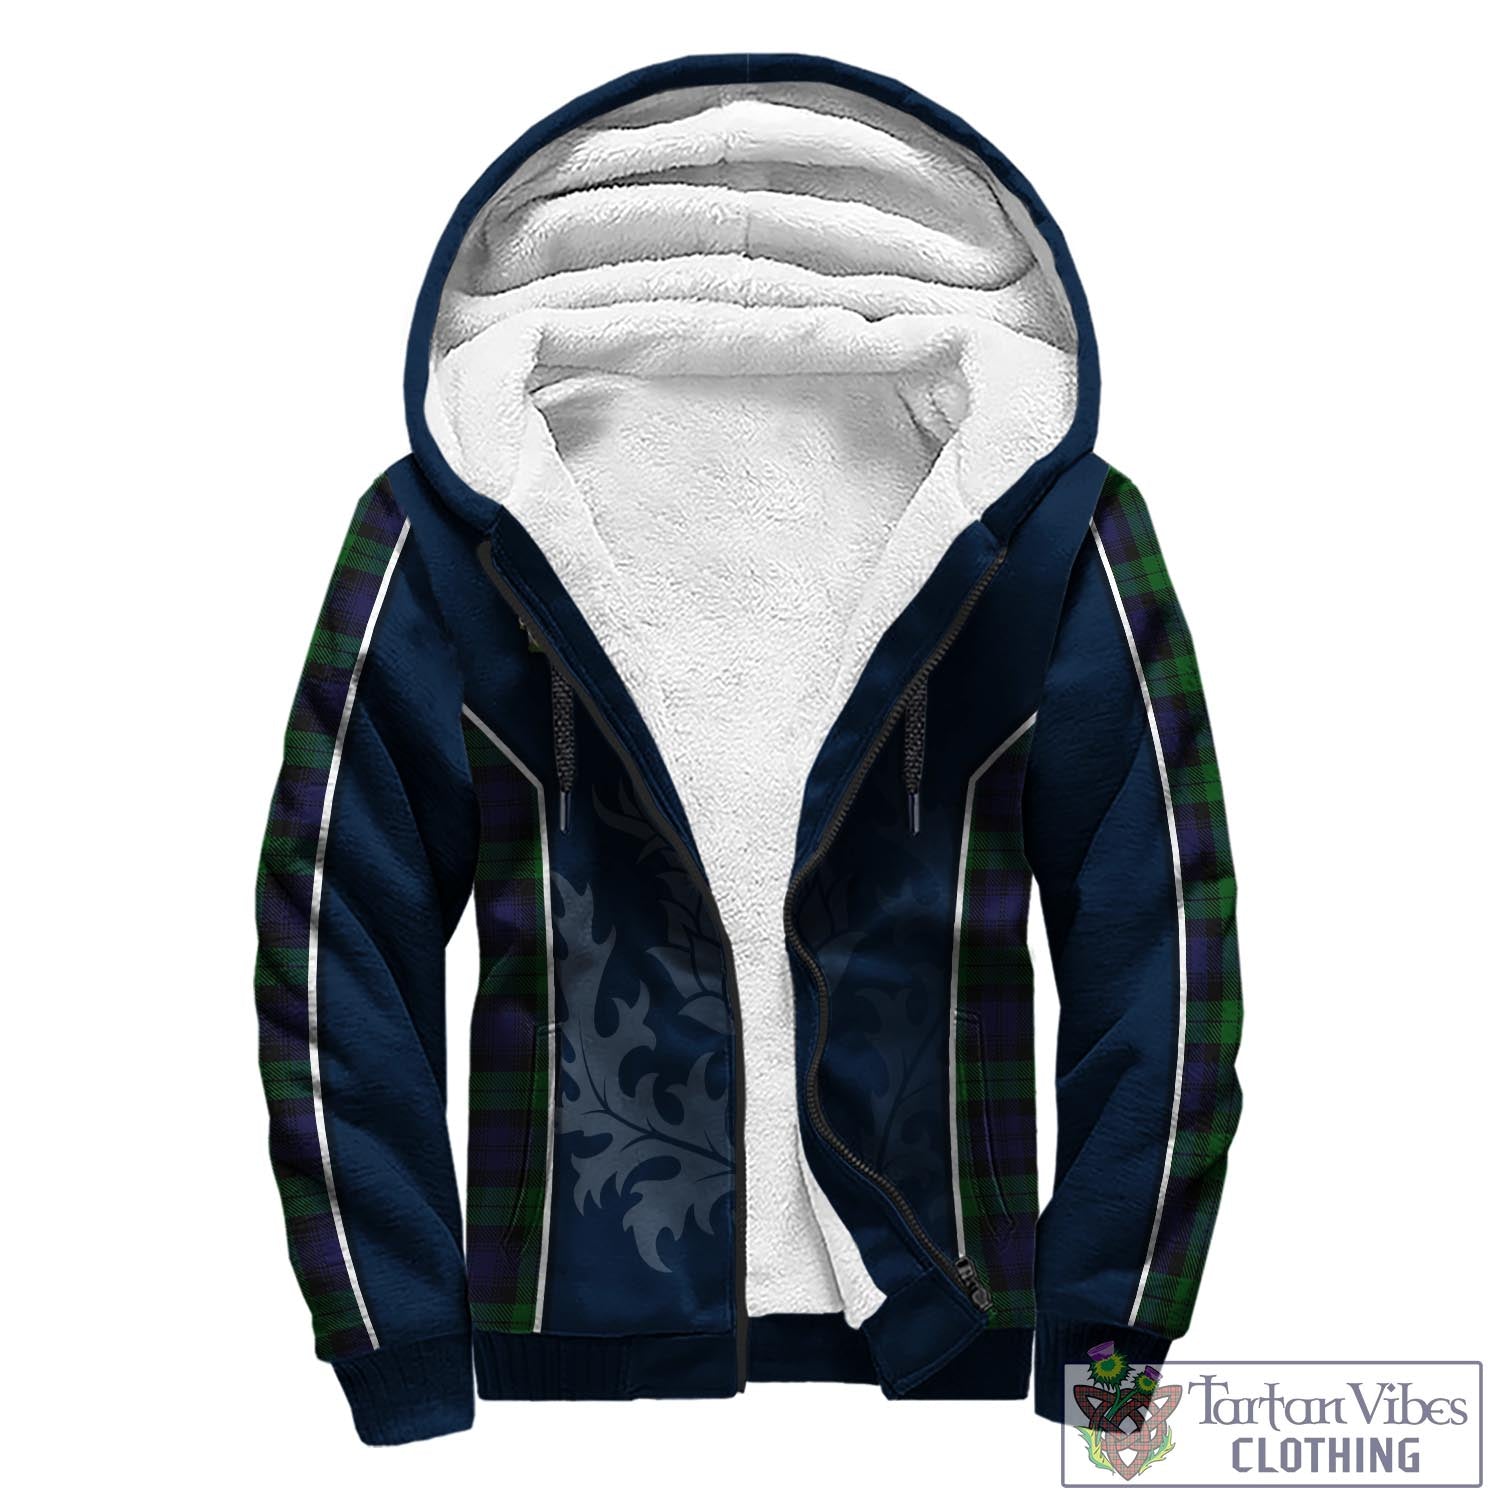 Tartan Vibes Clothing Black Watch Tartan Sherpa Hoodie with Family Crest and Scottish Thistle Vibes Sport Style